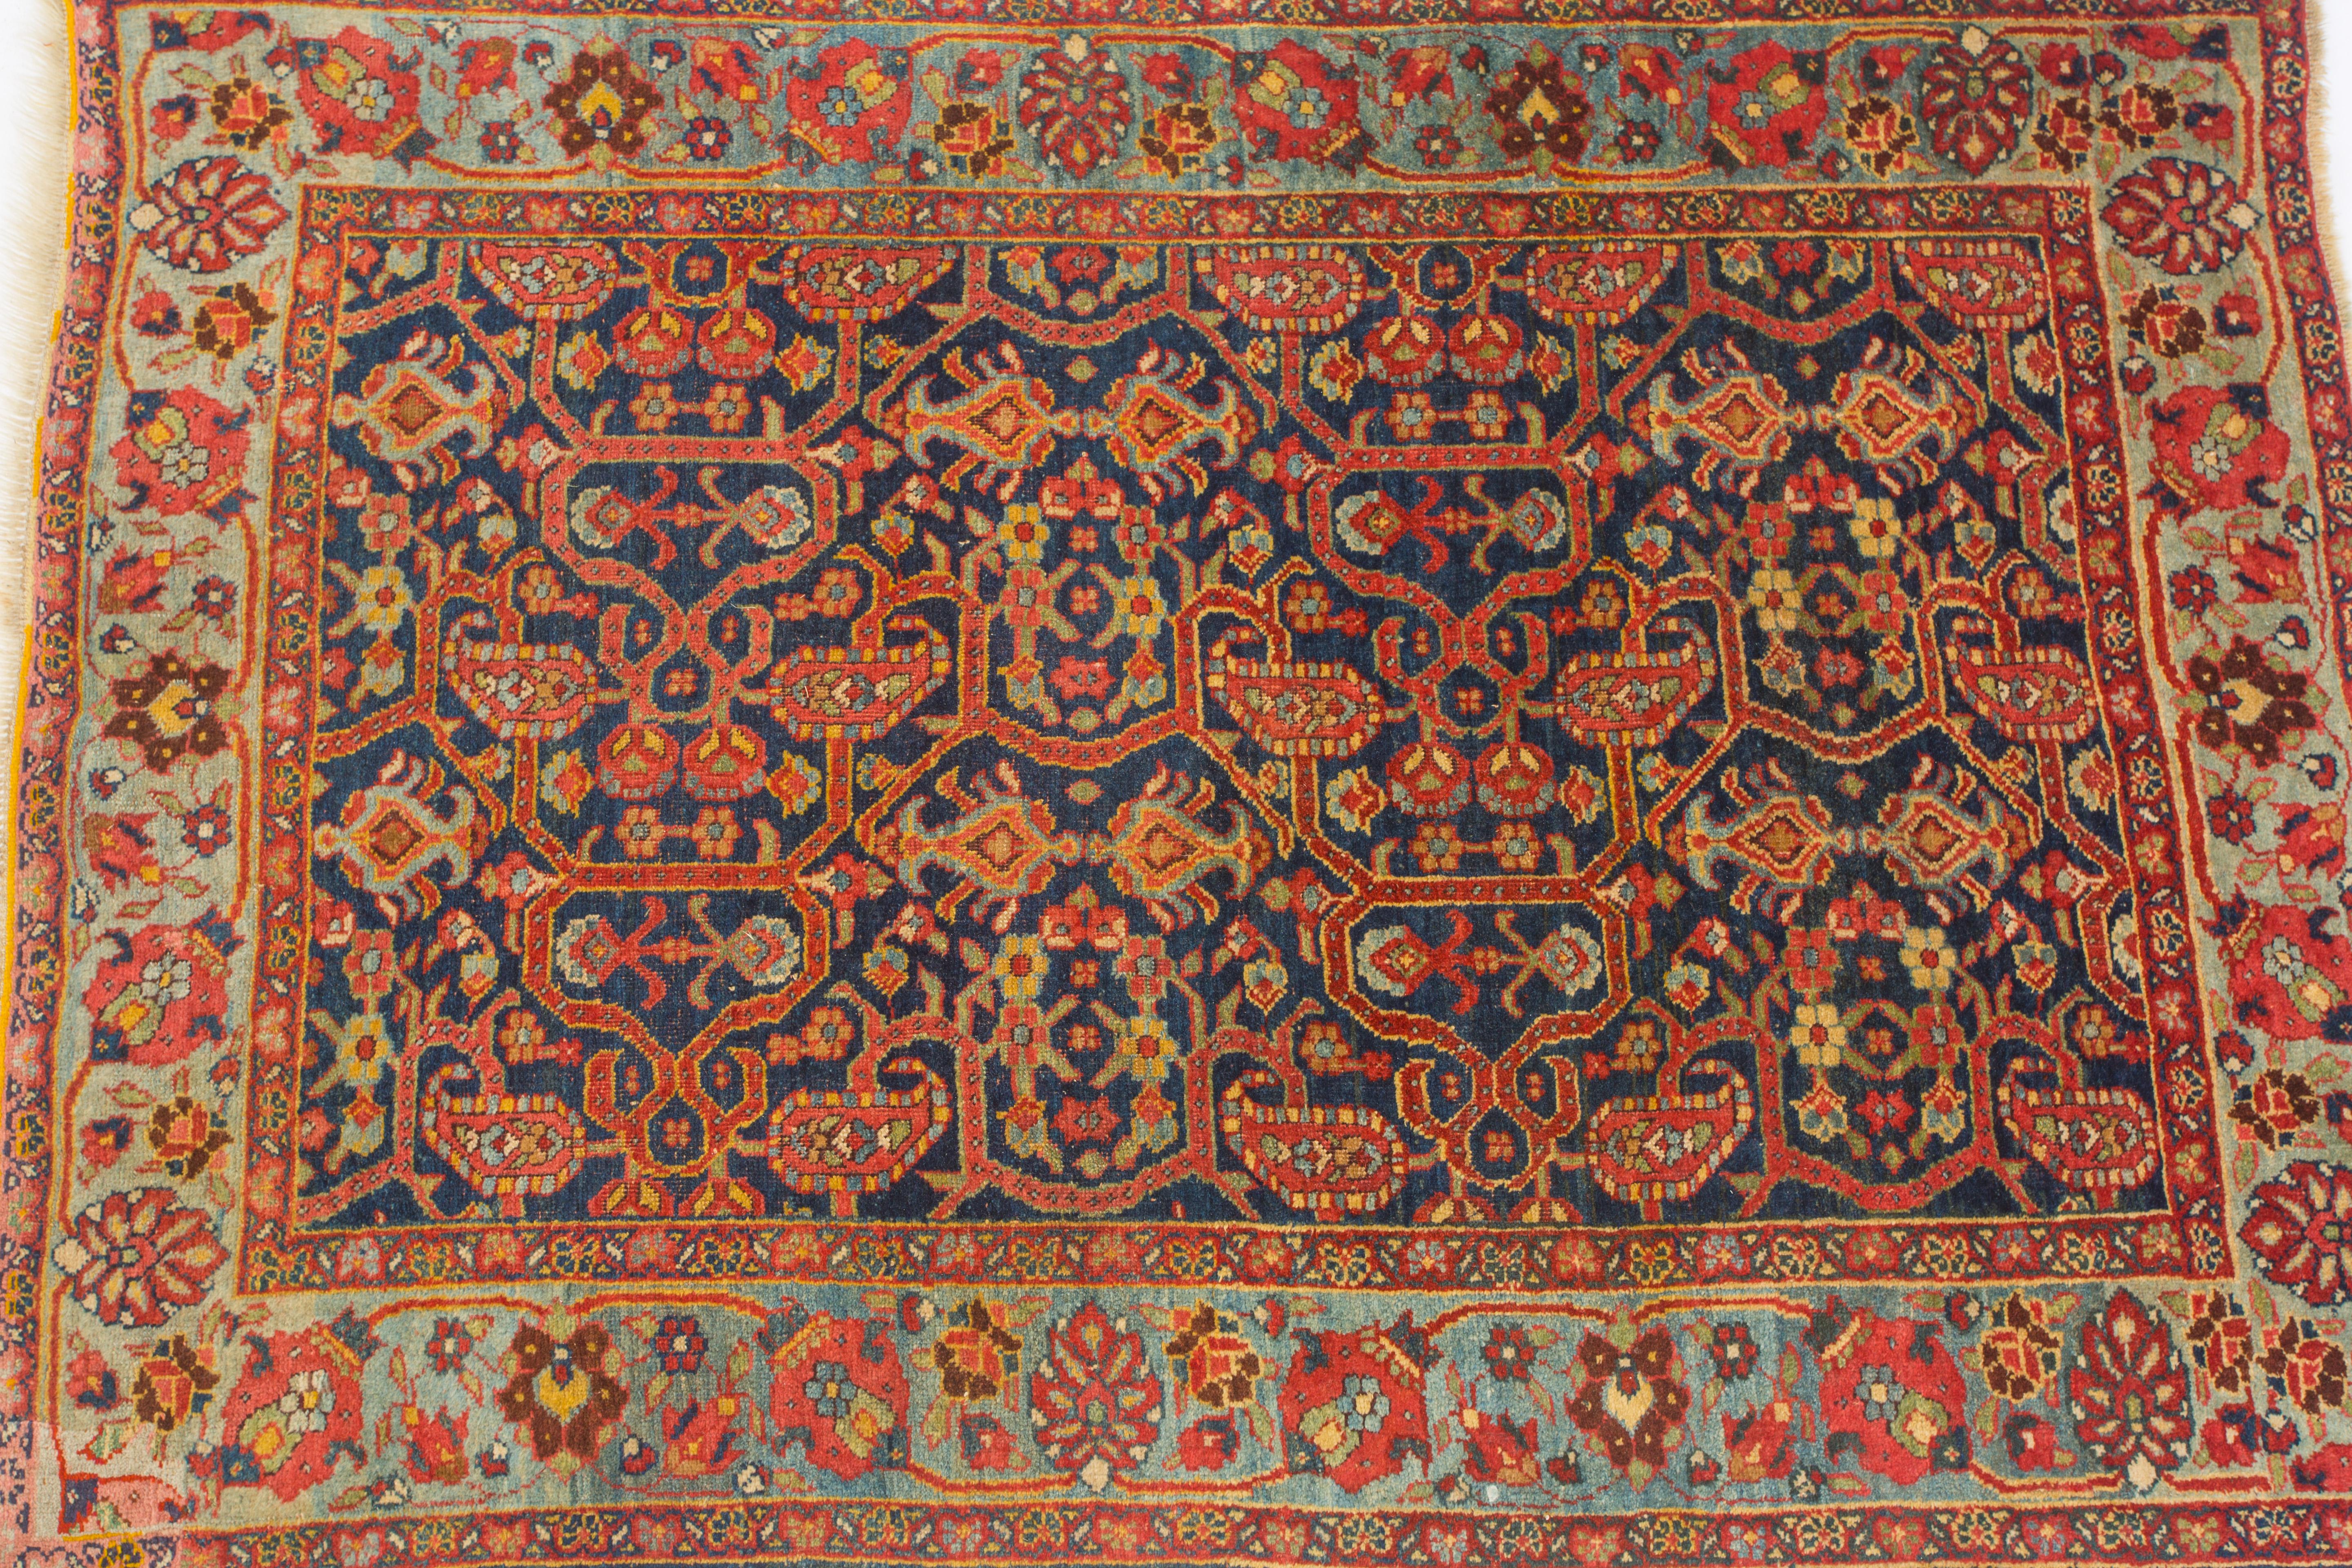 Rare Afshar Bidjar 1880
BIDJAR (AFSHAR BIDJAR RARE VARIANT) 1880 or earlier 
6 x 4 feet

Acquired from an Australian collector



 Bidjar carpets are known as the iron carpets of Asia, the densest and hardest-wearing variety made anywhere.